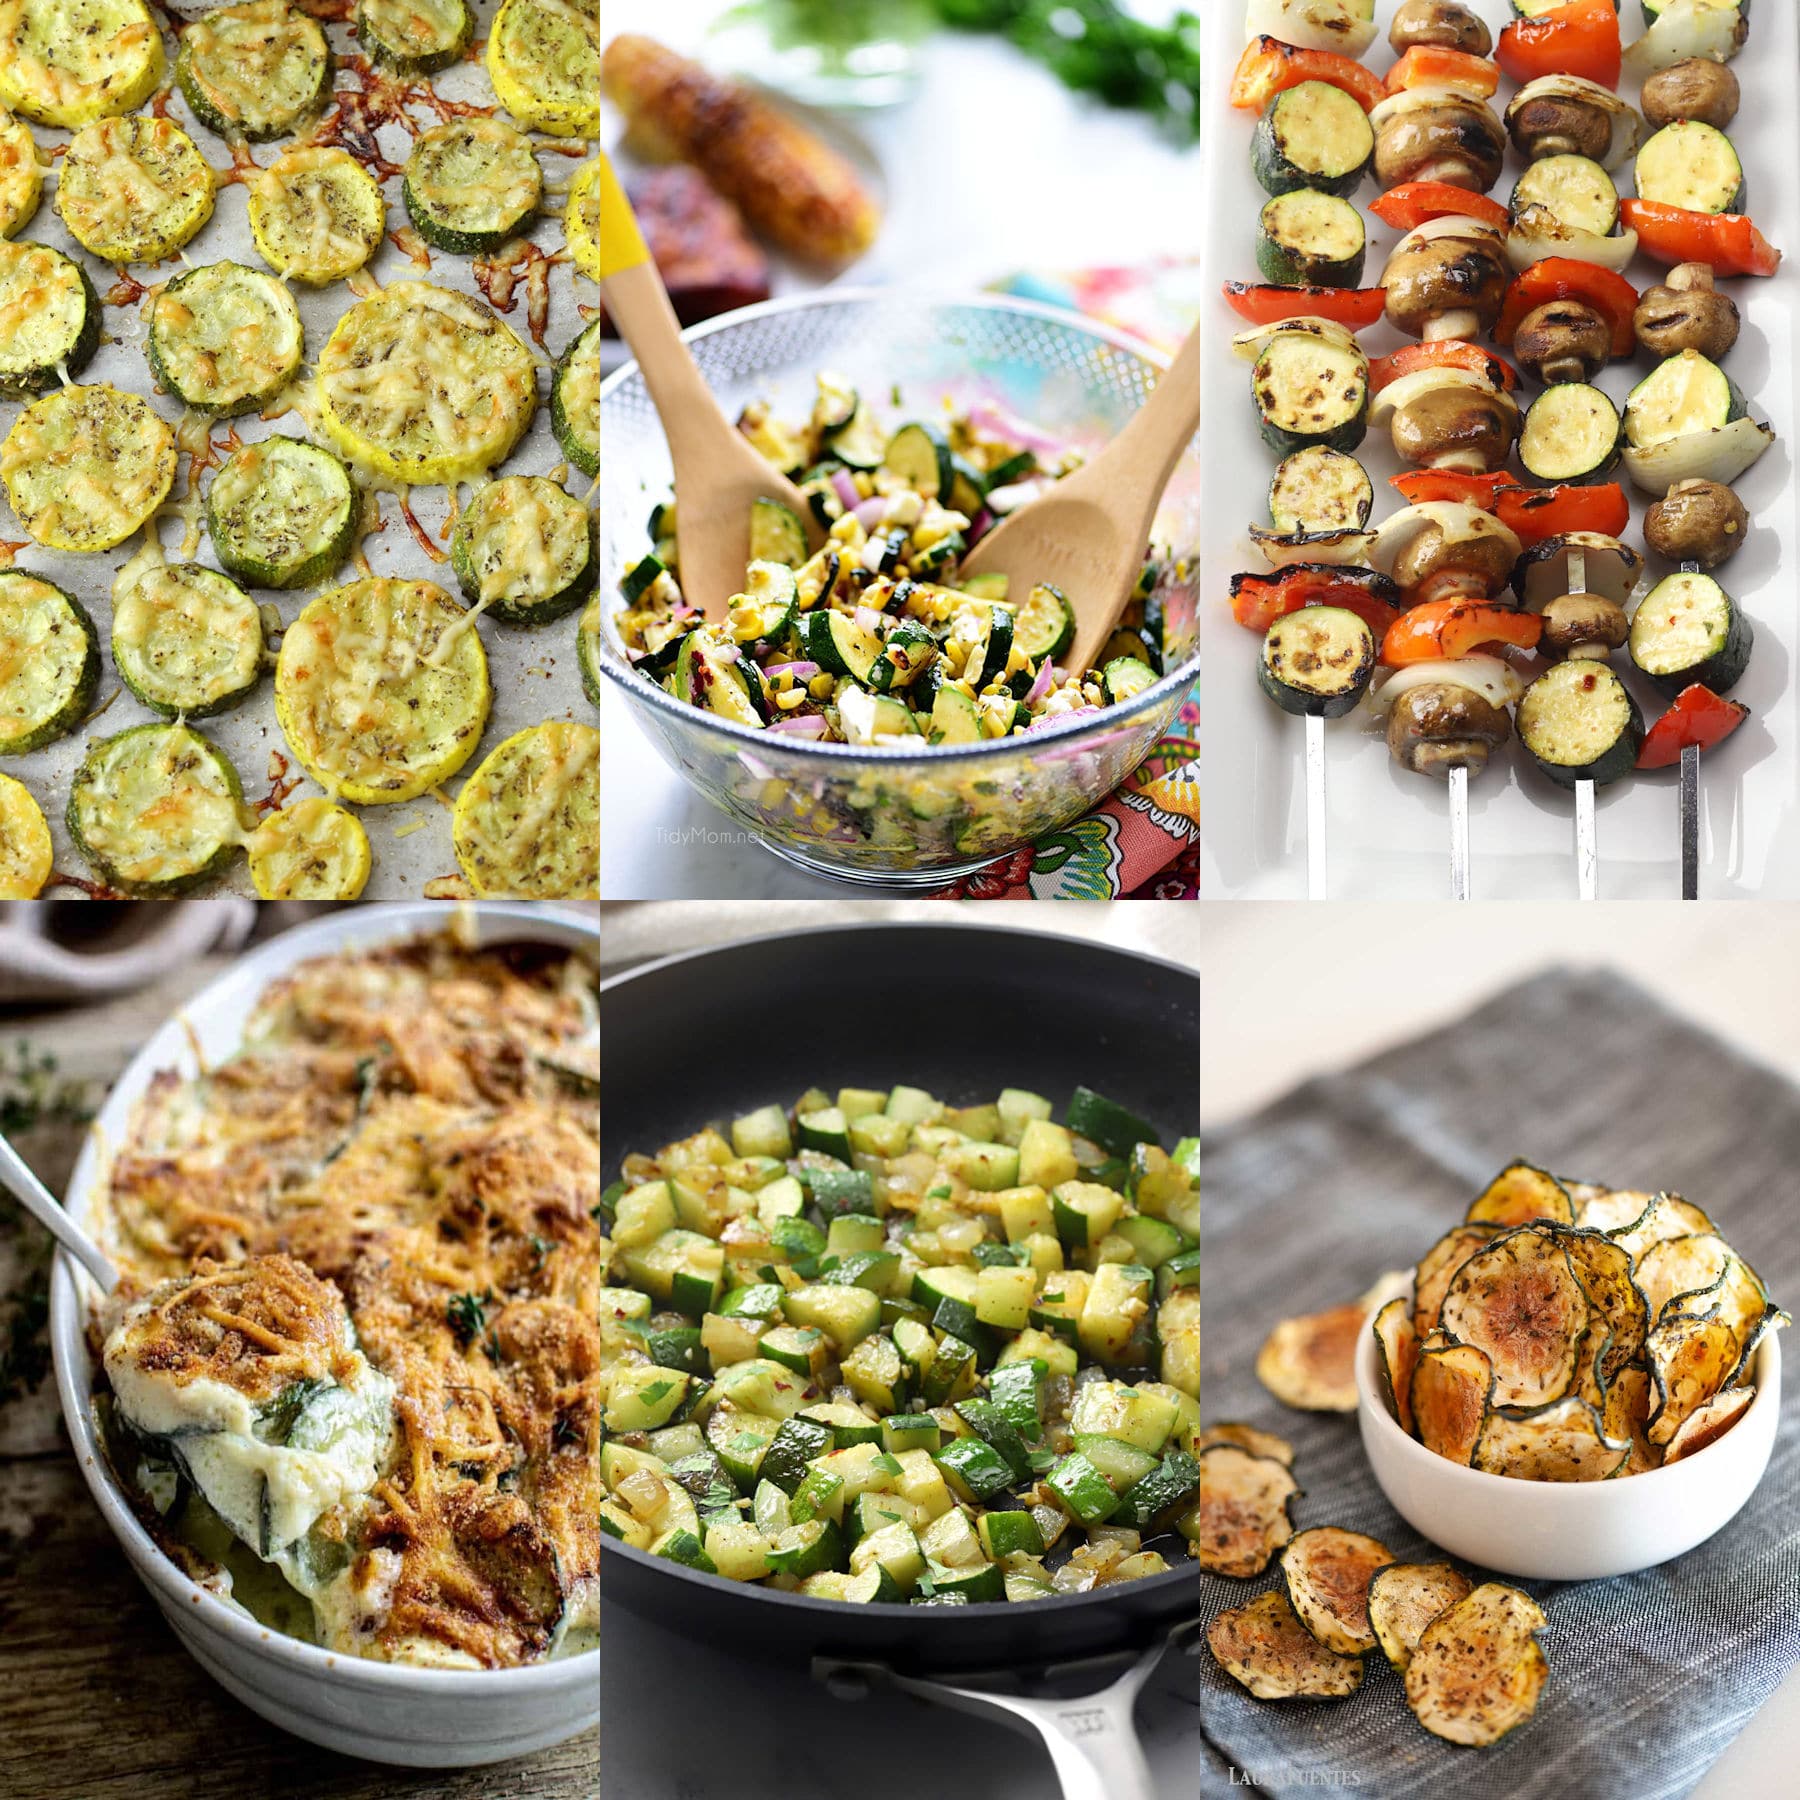 Decorative collage of zucchini side dishes.